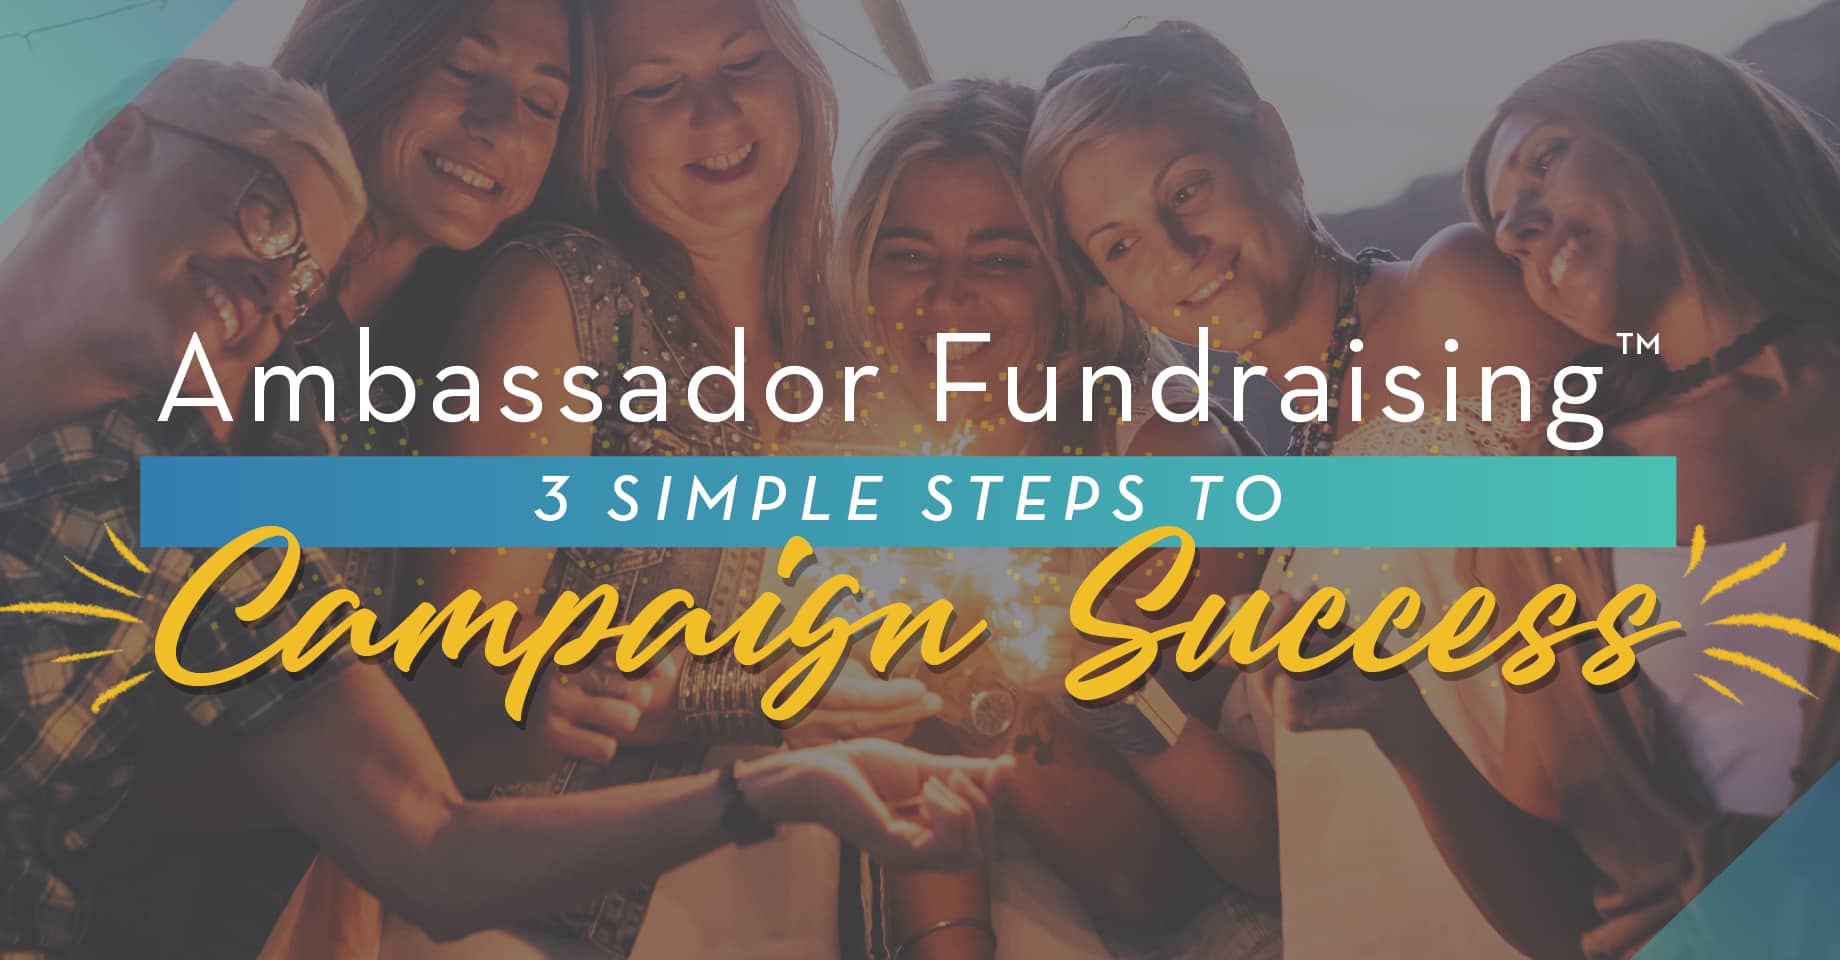 Ambassador Fundraising 3 Simple Steps to Campaign Success from OneCause